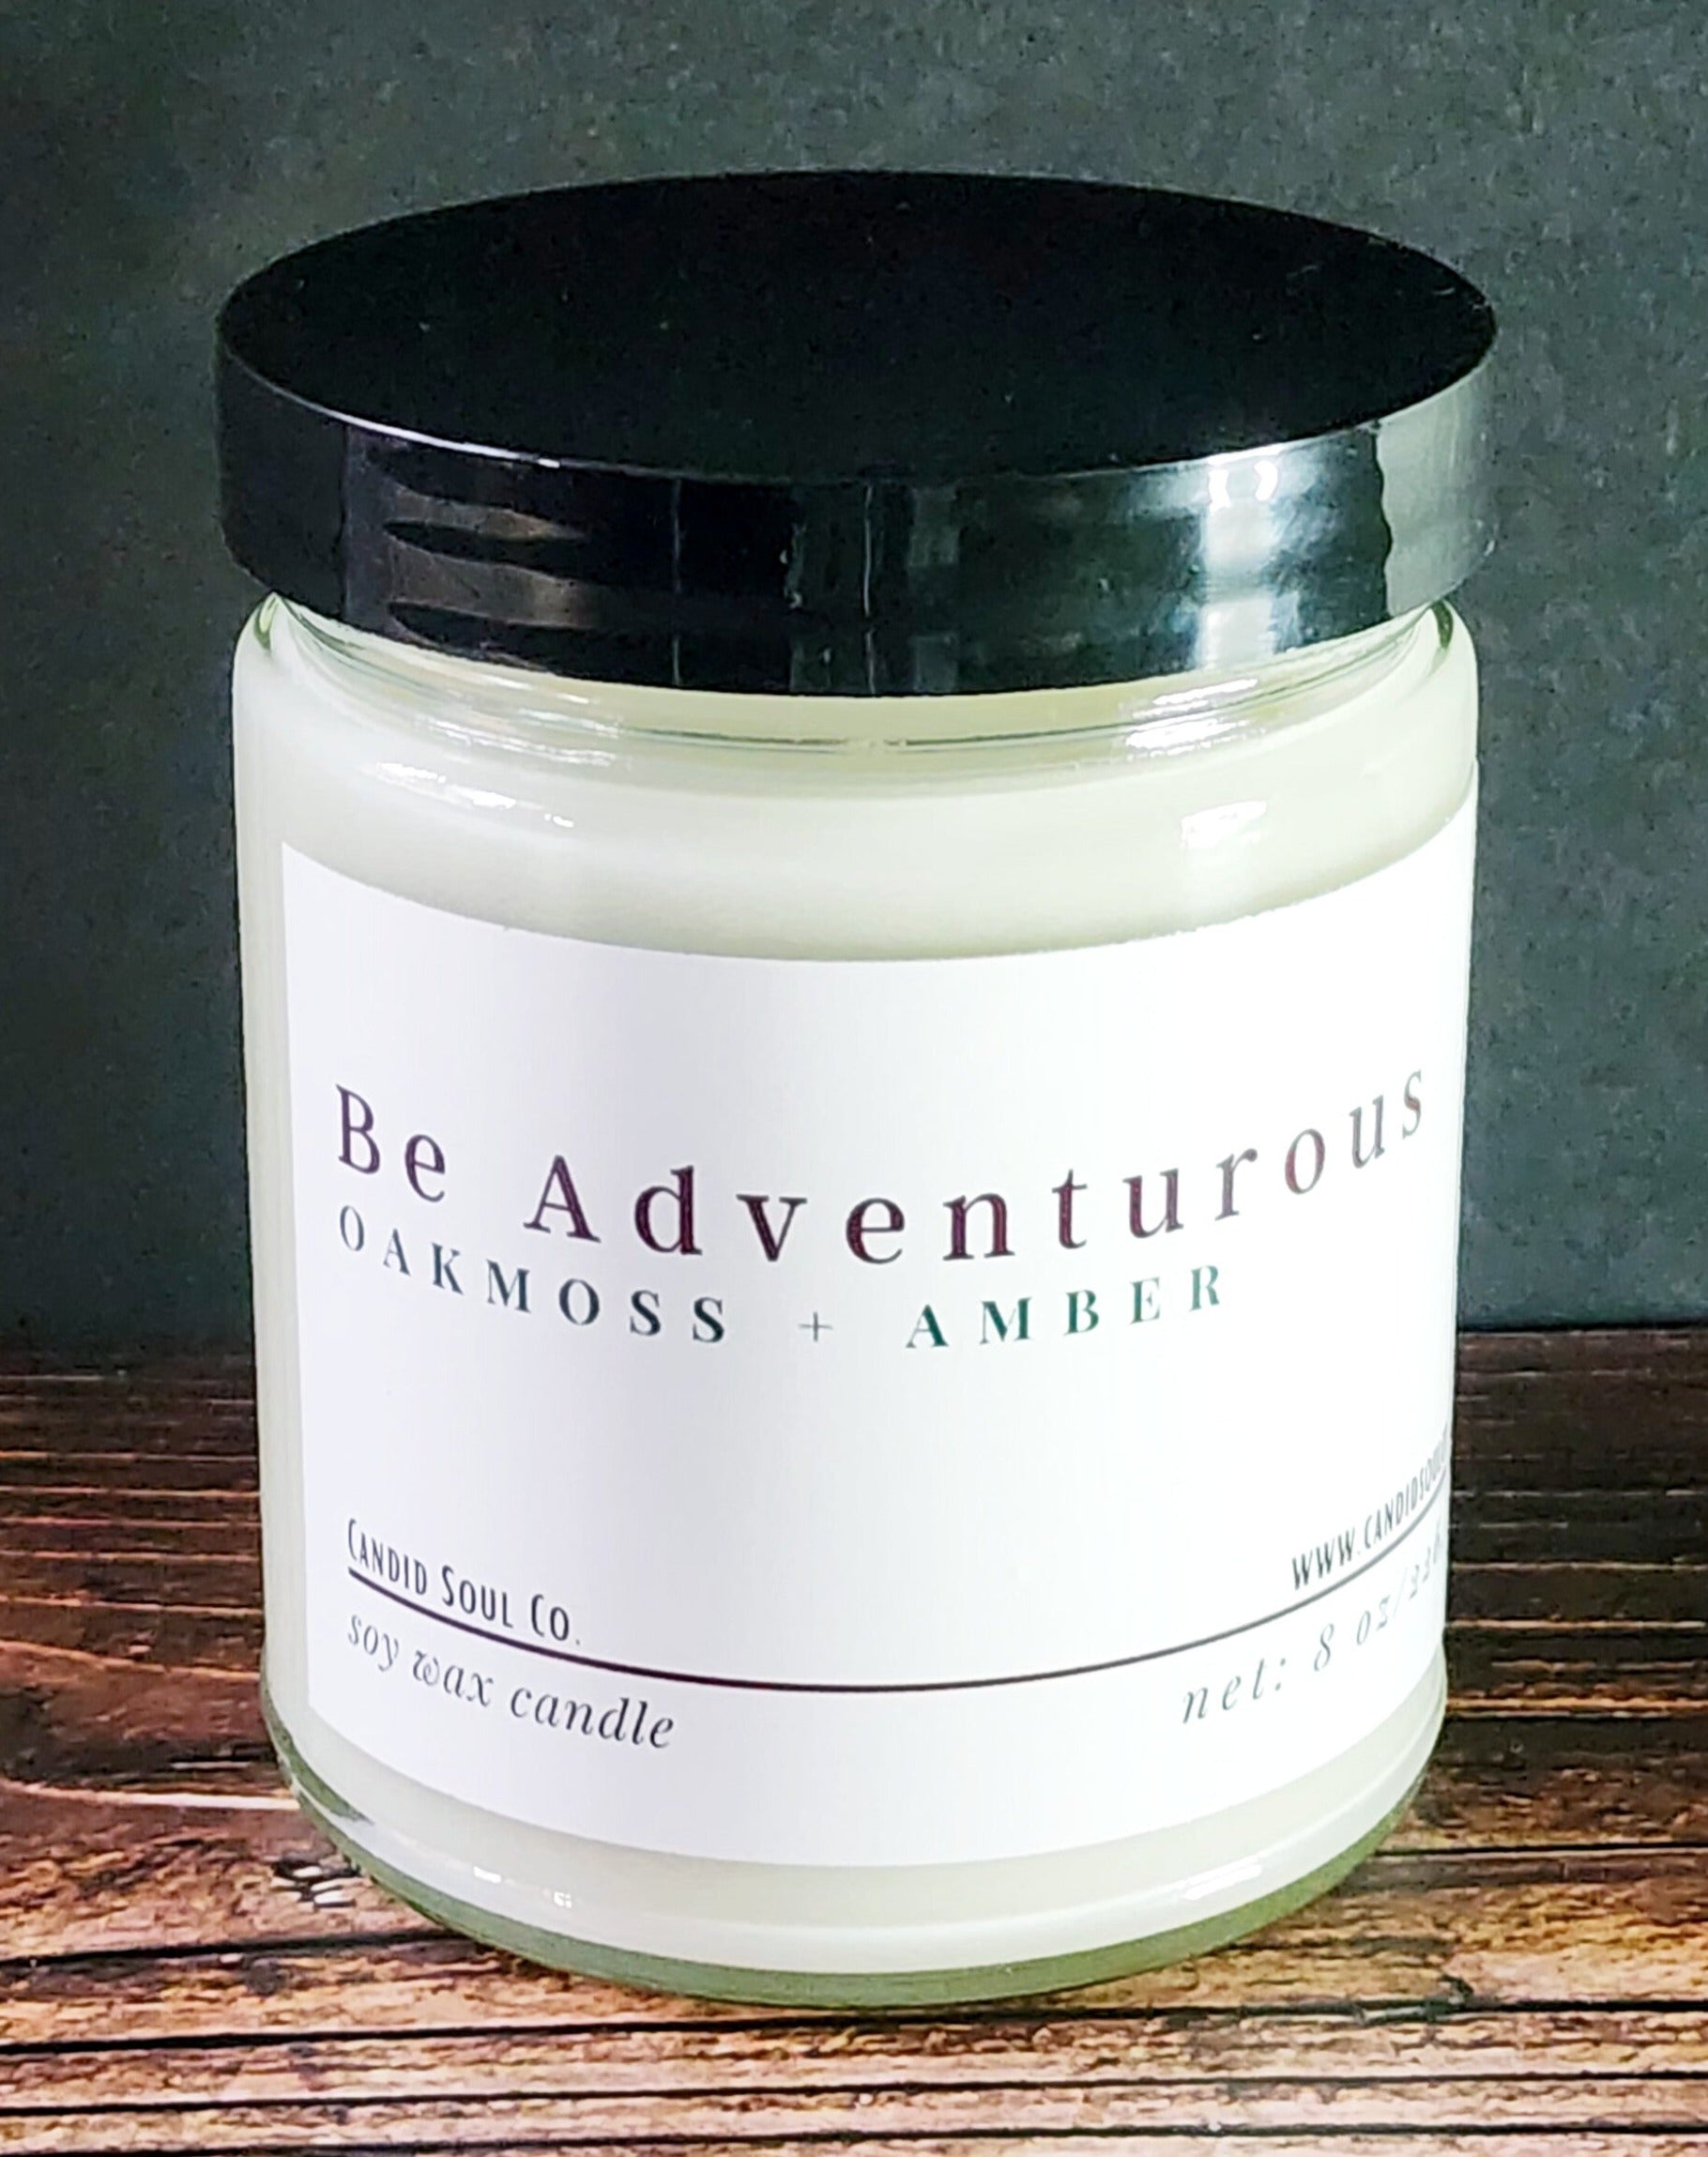 Be Adventurous: Scented Soy Wax Affirmation Candle